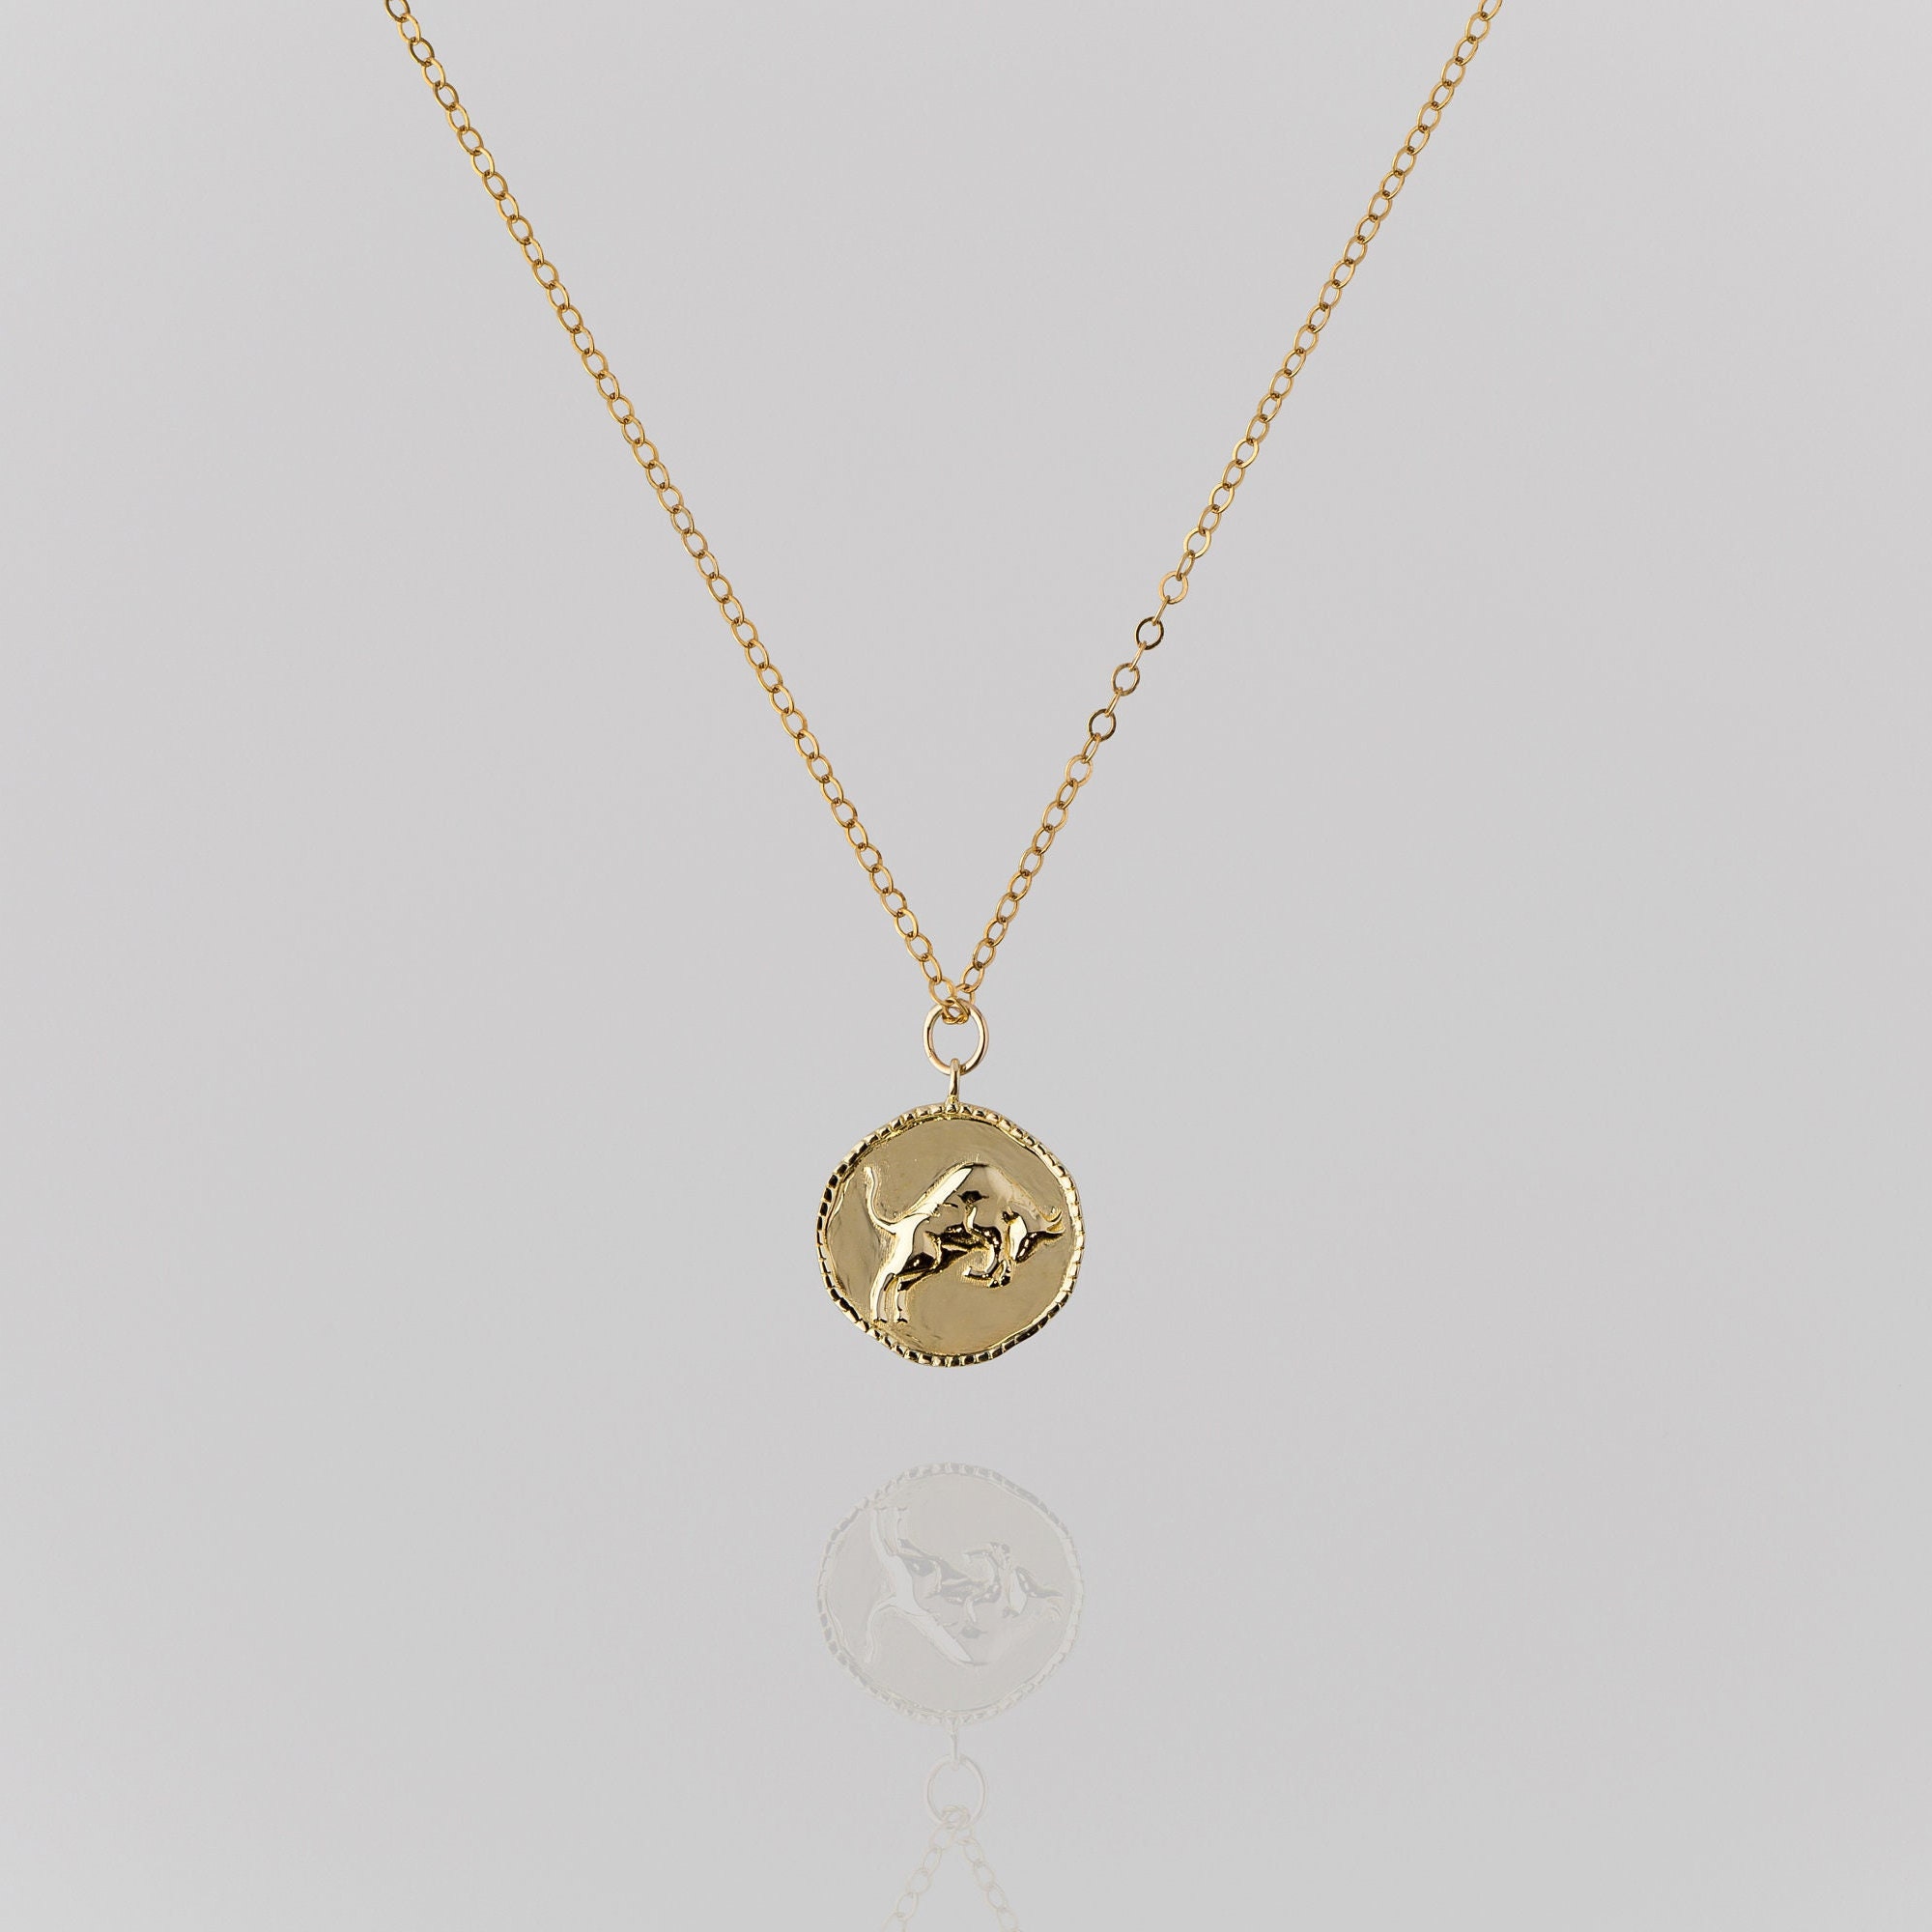 Zodiac Gold Pendant Coin Necklace with Astrology Symbol and Inspired Word -  TAURUS – Jane Win by Jane Winchester Paradis